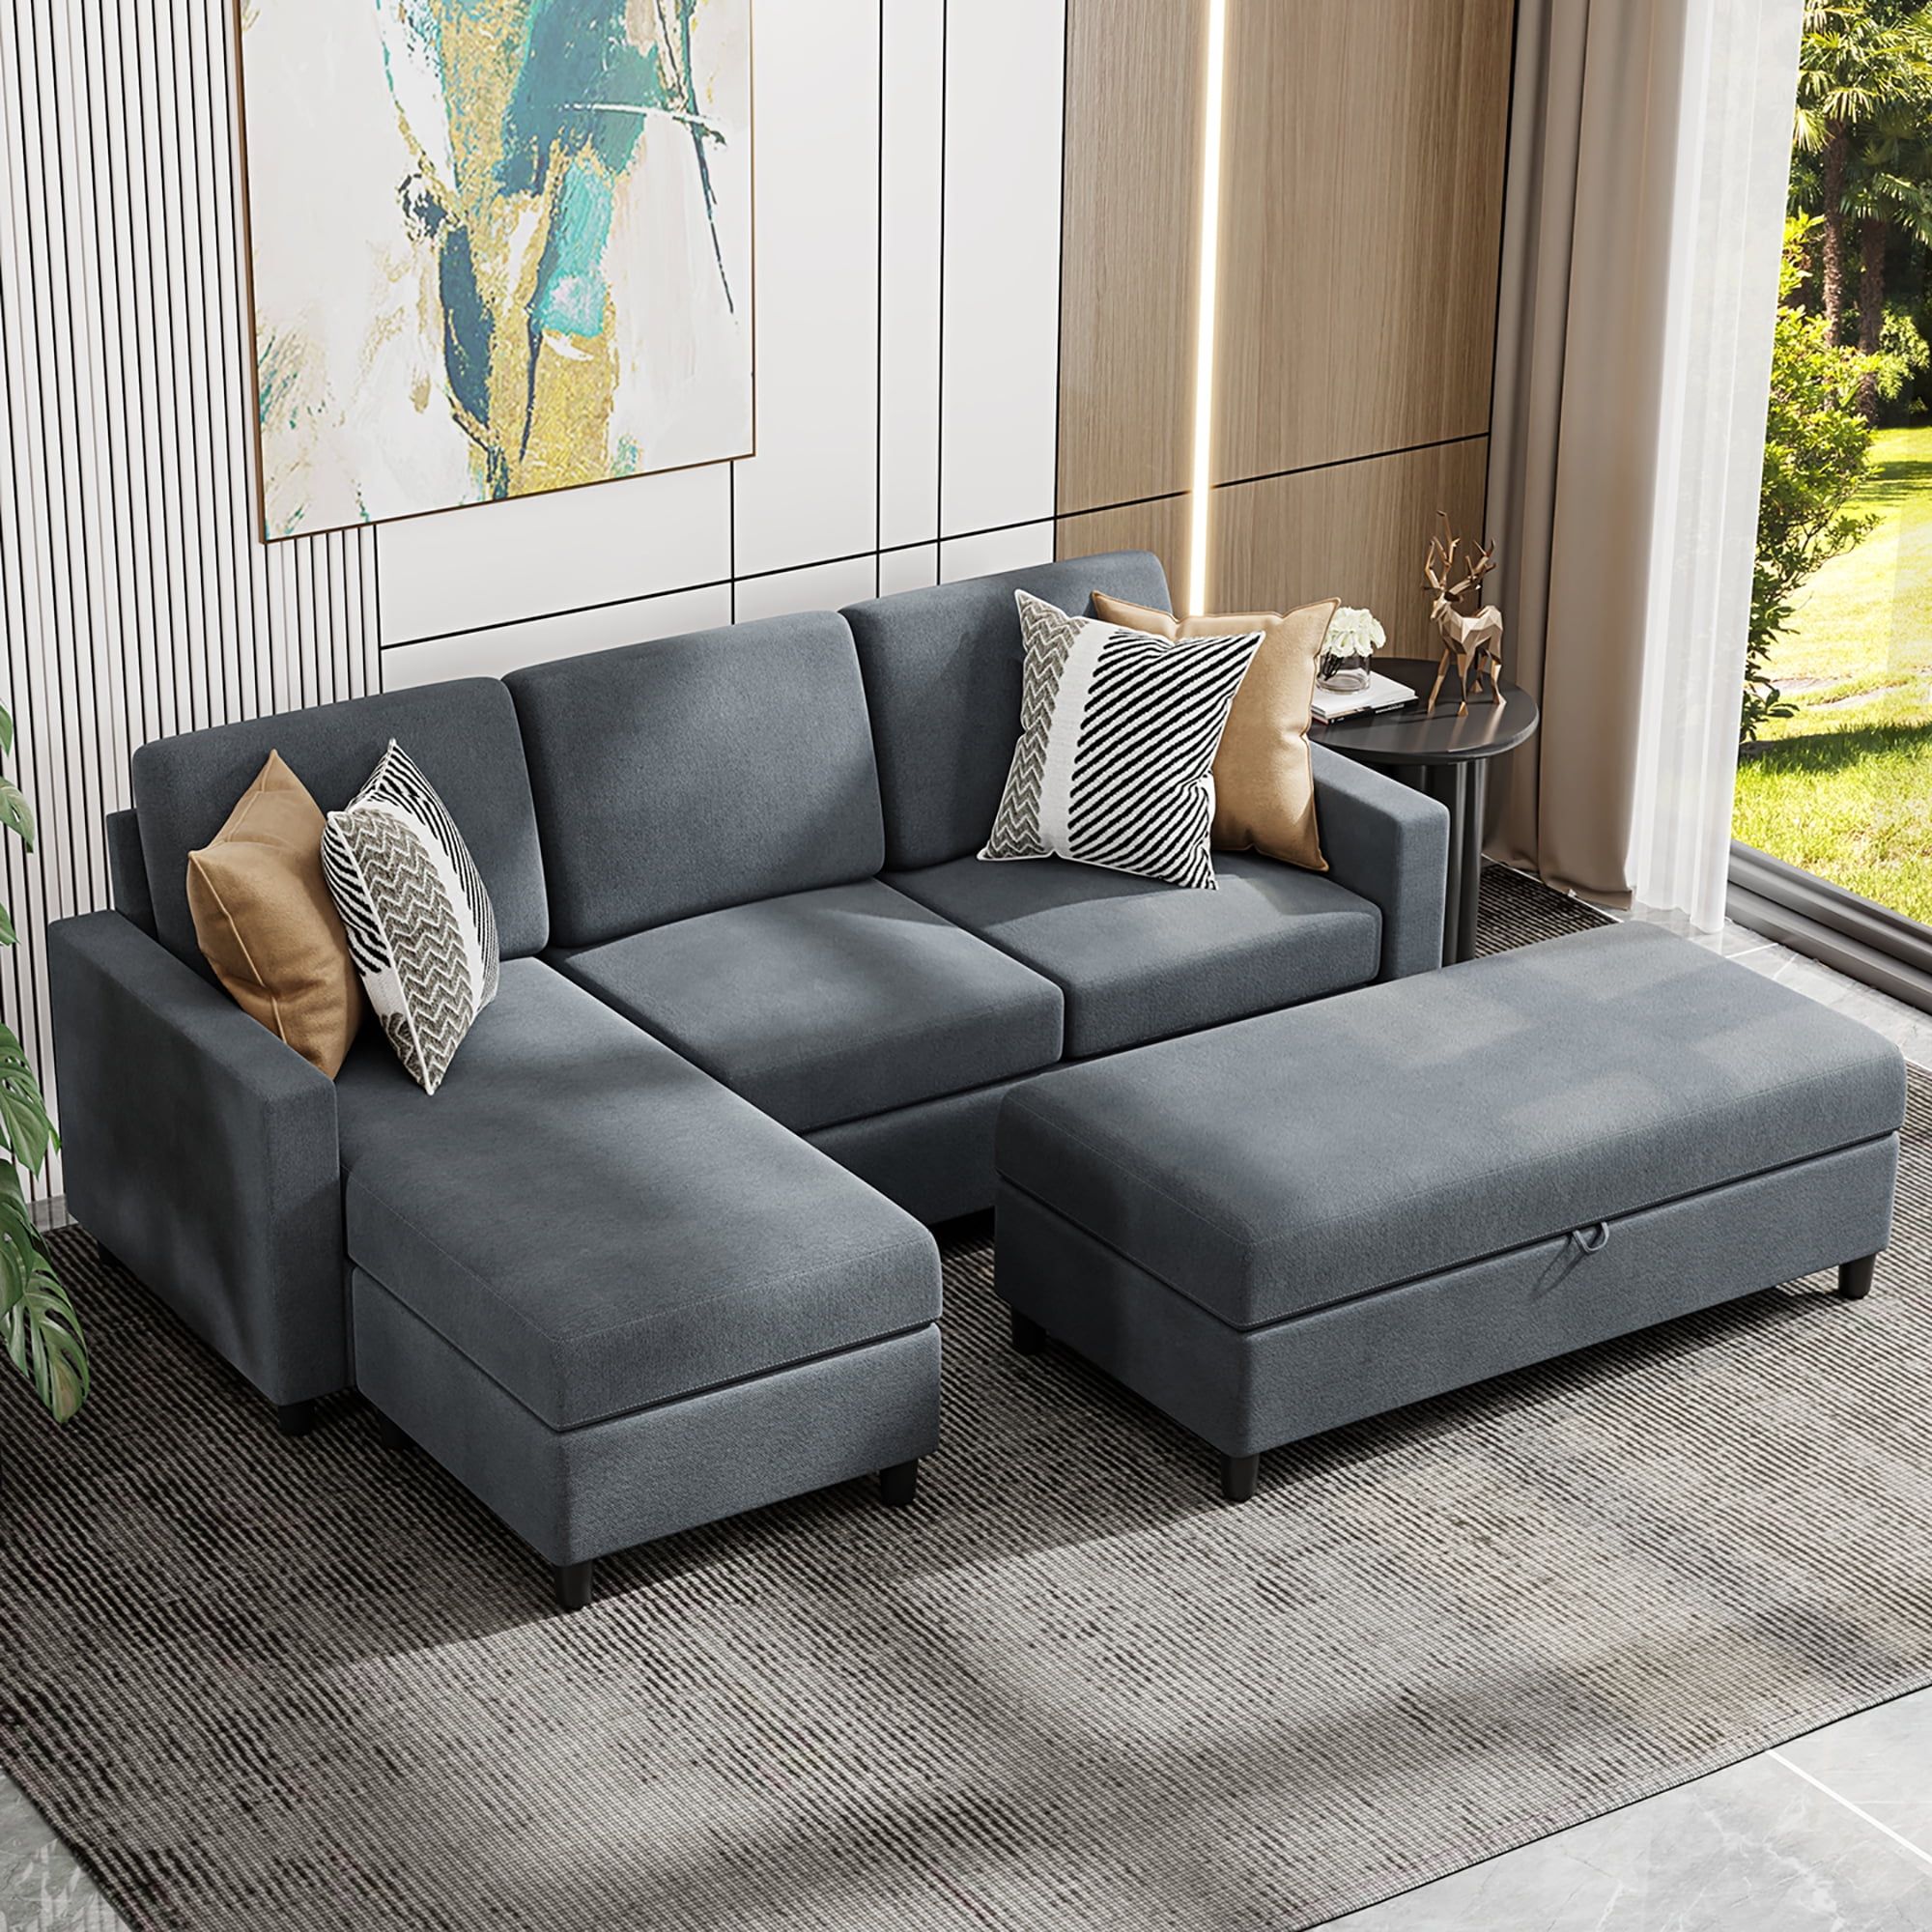 Convertible Sectional Sofa Couch With Storage Ottoman, L Shaped Wide  Reversible Chaise With Linen Fabric(Grey) – Walmart Pertaining To Convertible L Shaped Sectional Sofas (Photo 1 of 15)